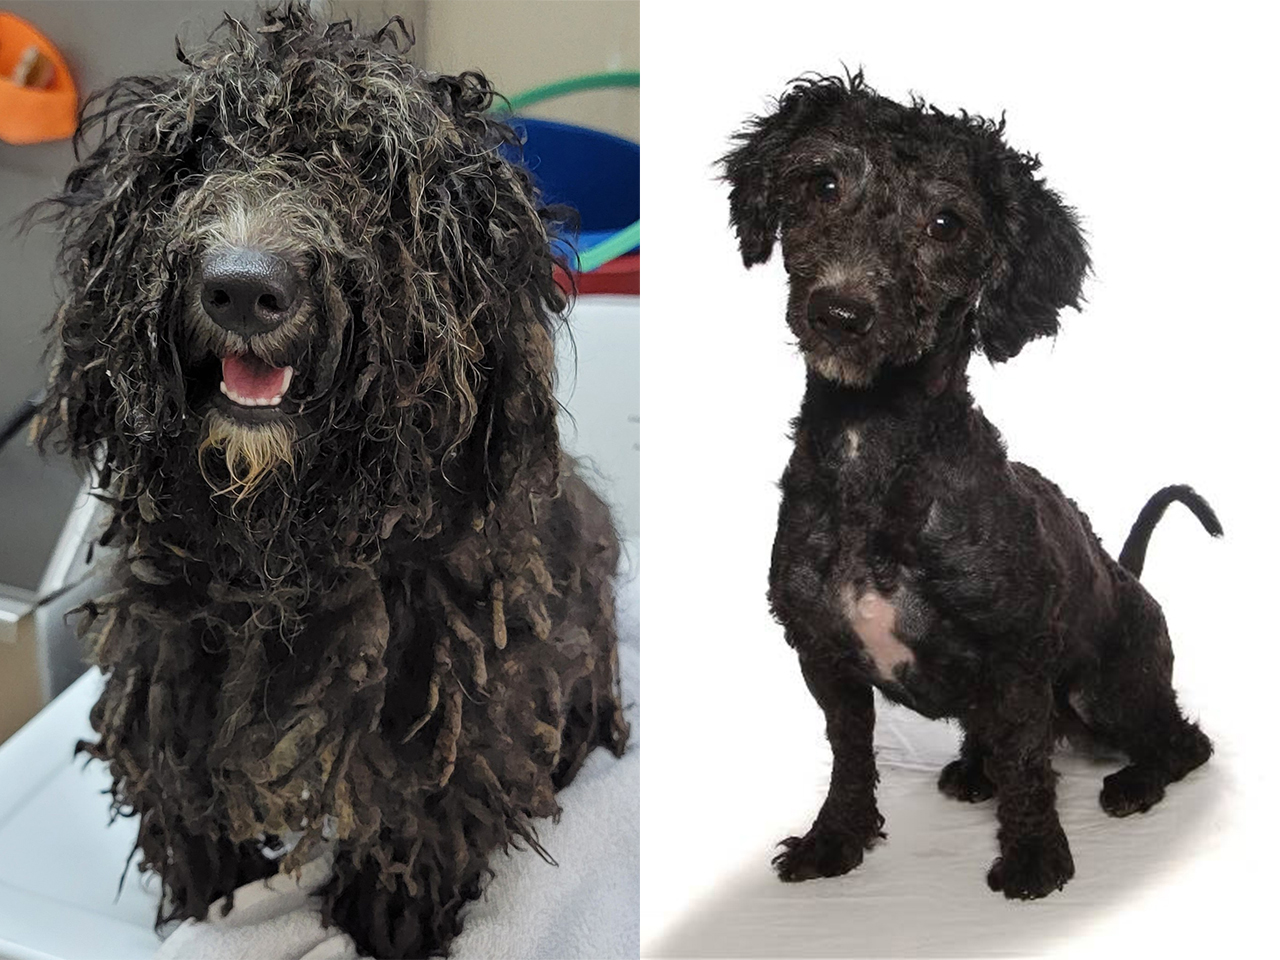 Jamie, rescued from a severe hoarding and neglect situation in Oakland Park, FL, has undergone a remarkable transformation after a grooming and bath, and she is now eagerly awaiting adoption to join a loving family as a clean and thriving puppy.